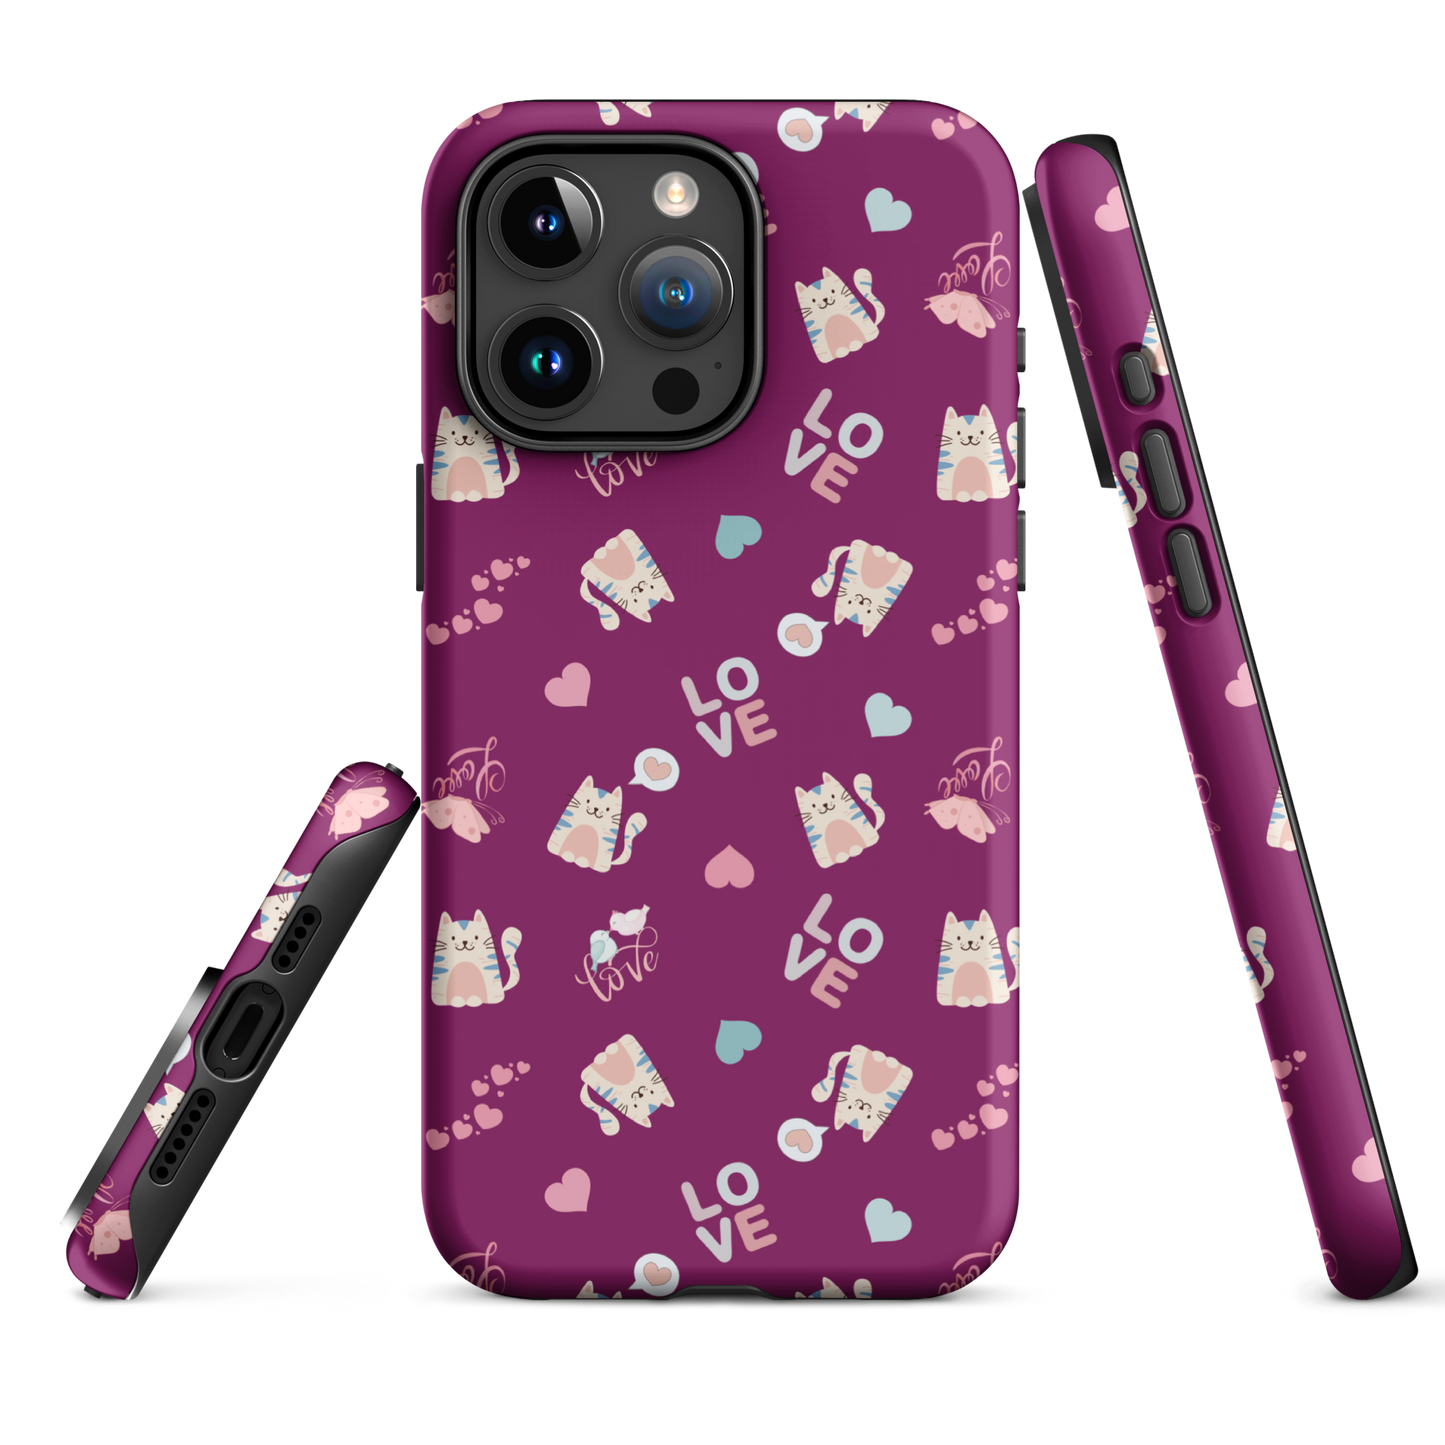 Tough case for iPhone 11, 12, 13, 14, 15 Variations | Adorable Cat Love Theme